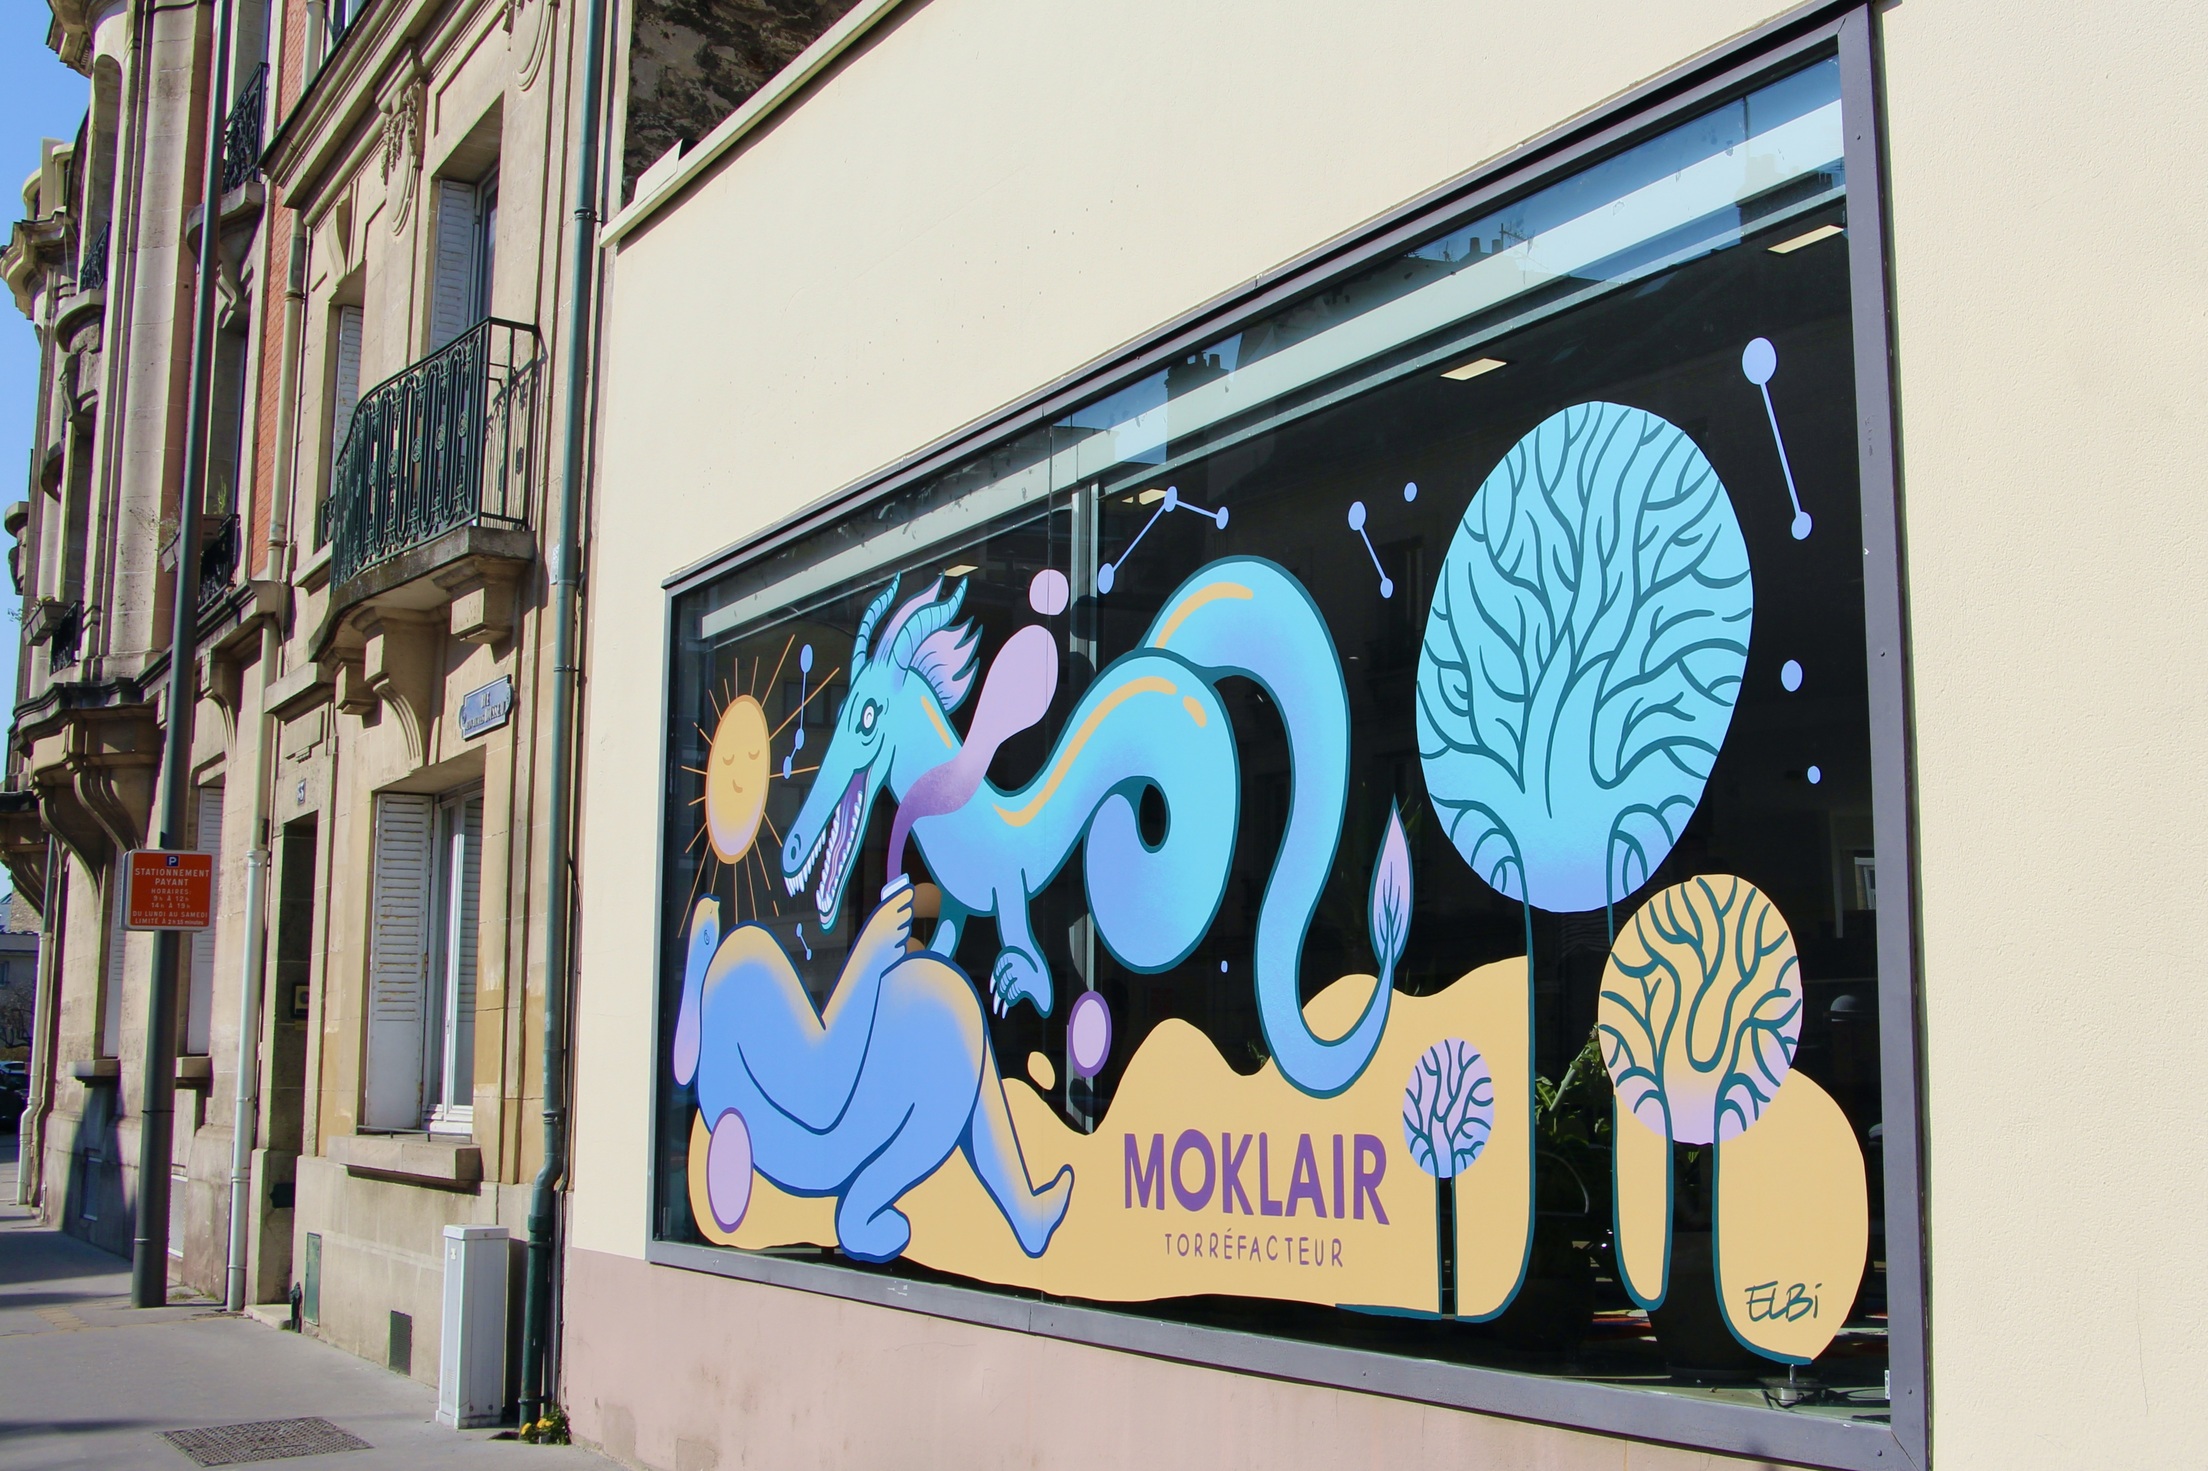 Moklair's window art decorates Rue Andrieux in Reims, France.